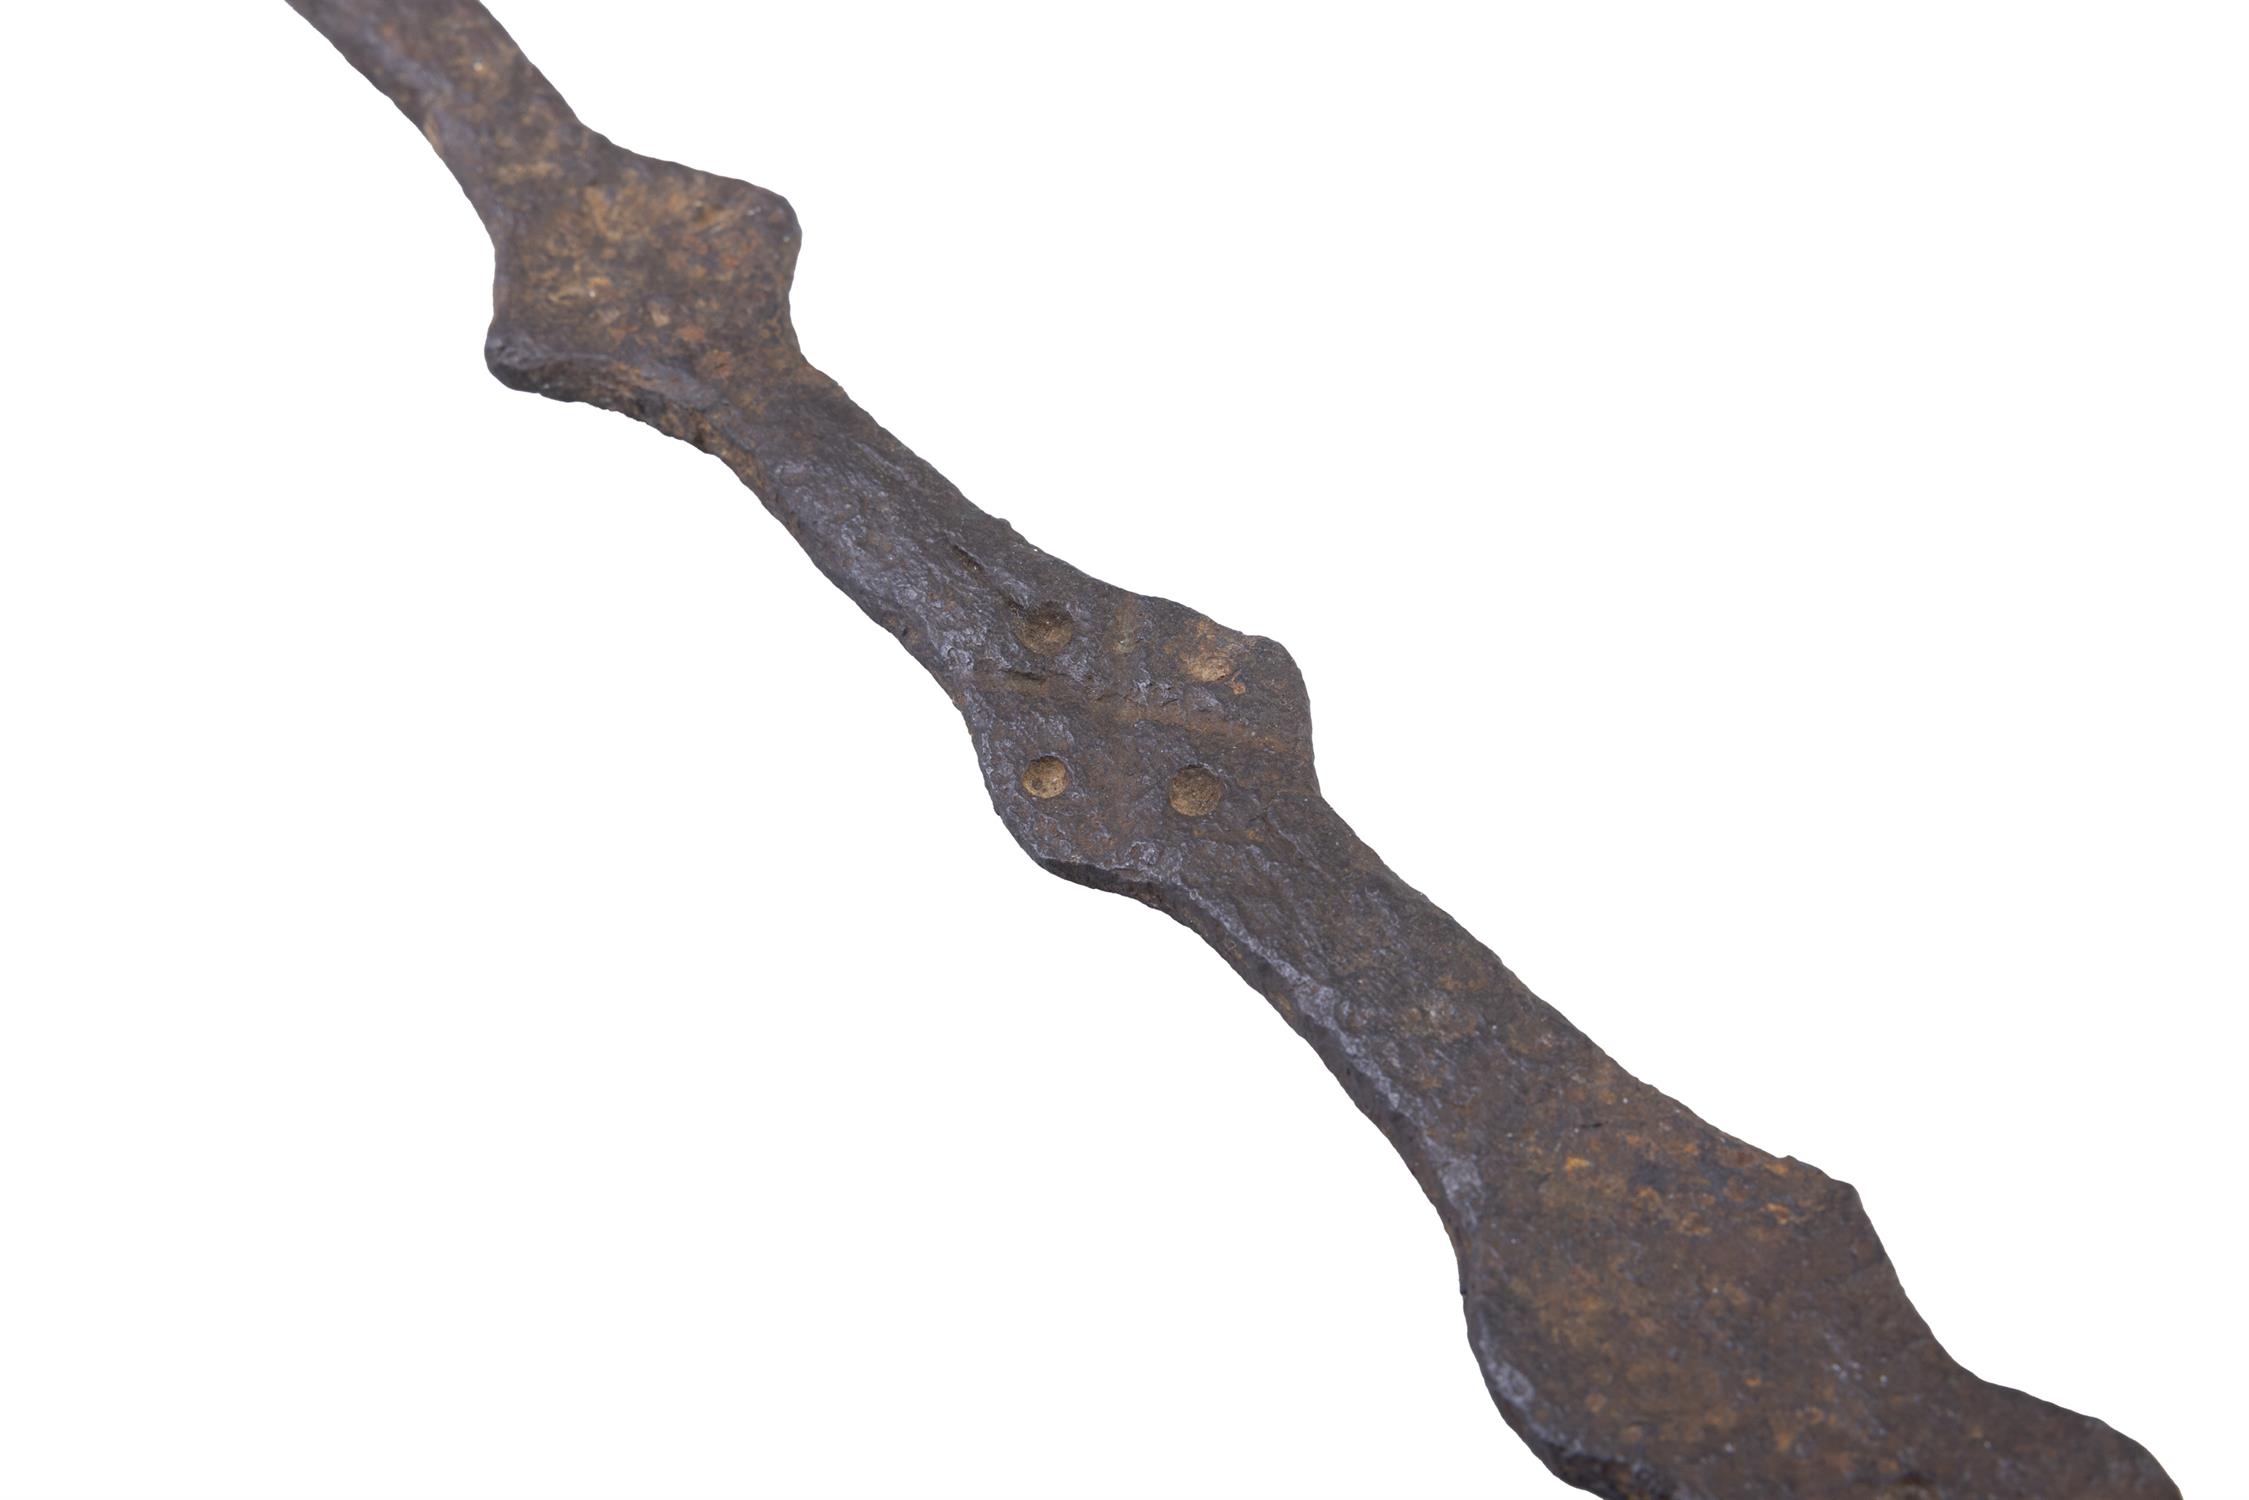 AN EARLY 19TH CENTURY WROUGHT IRON HEARTH FLESH FORK, the long flattened handle with pierced - Image 3 of 3